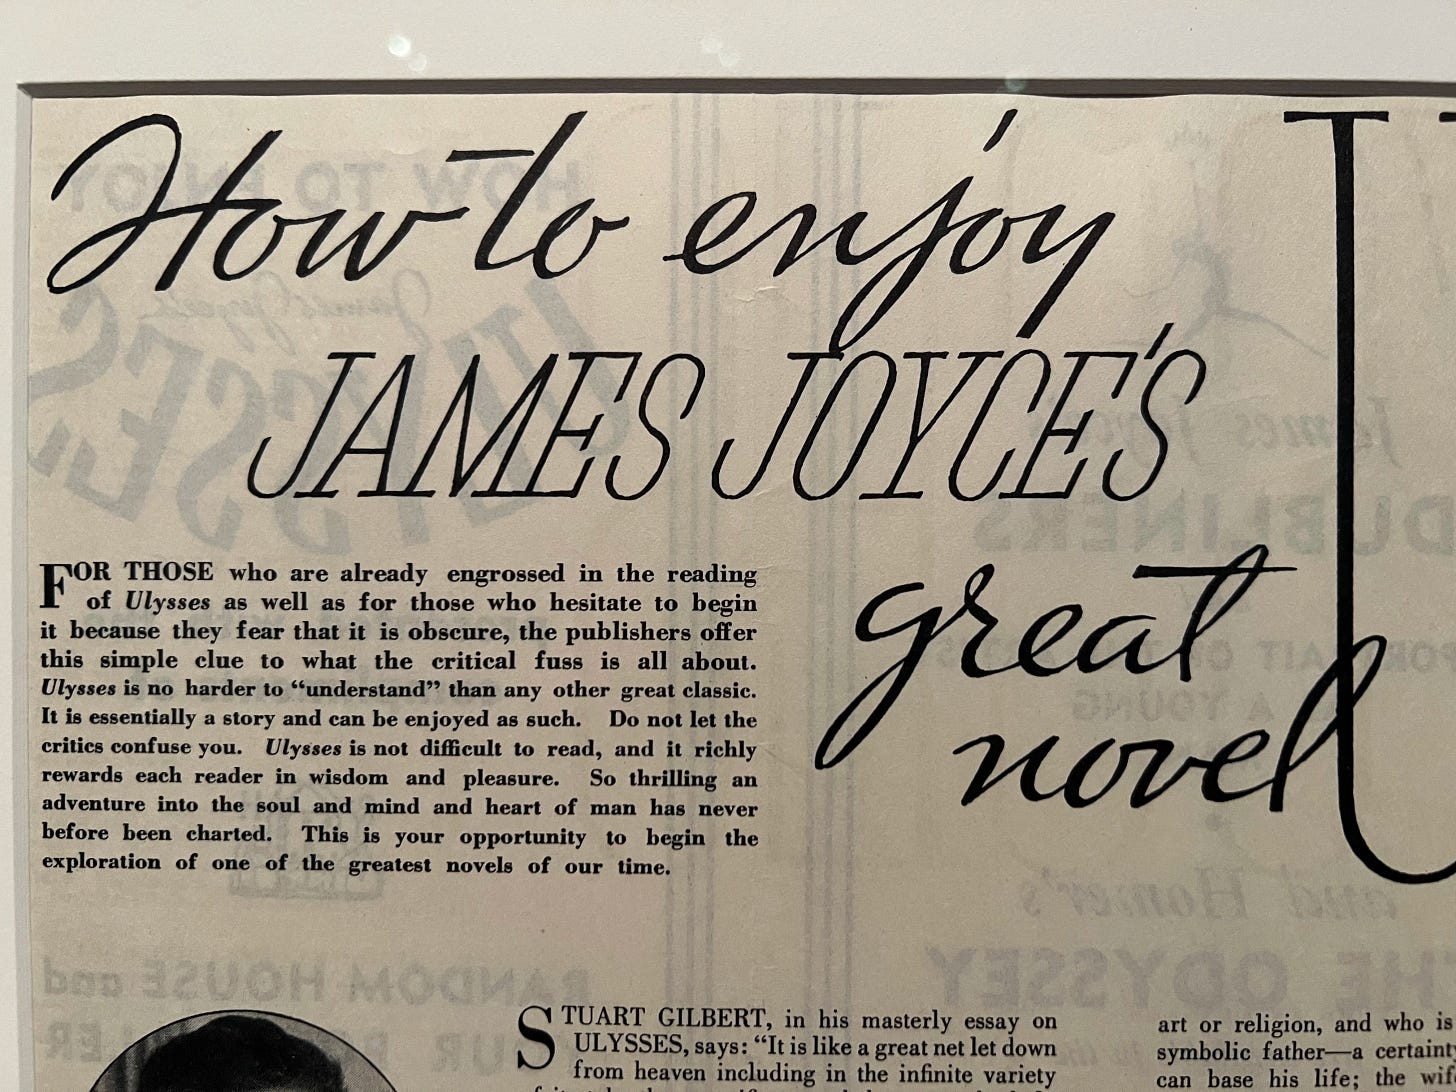 A guide to reading Ulysses; generally not a great sign